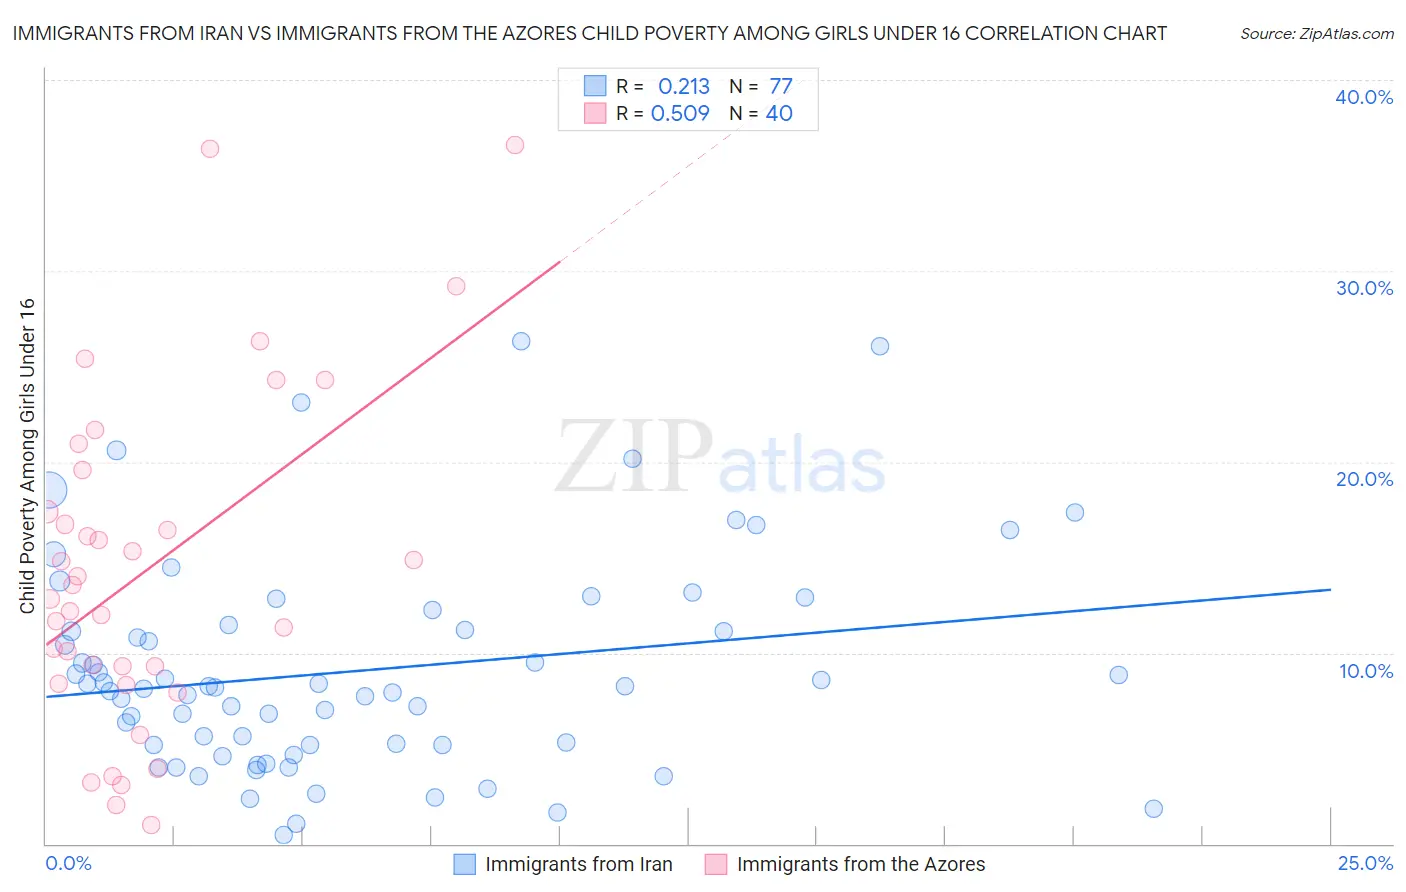 Immigrants from Iran vs Immigrants from the Azores Child Poverty Among Girls Under 16